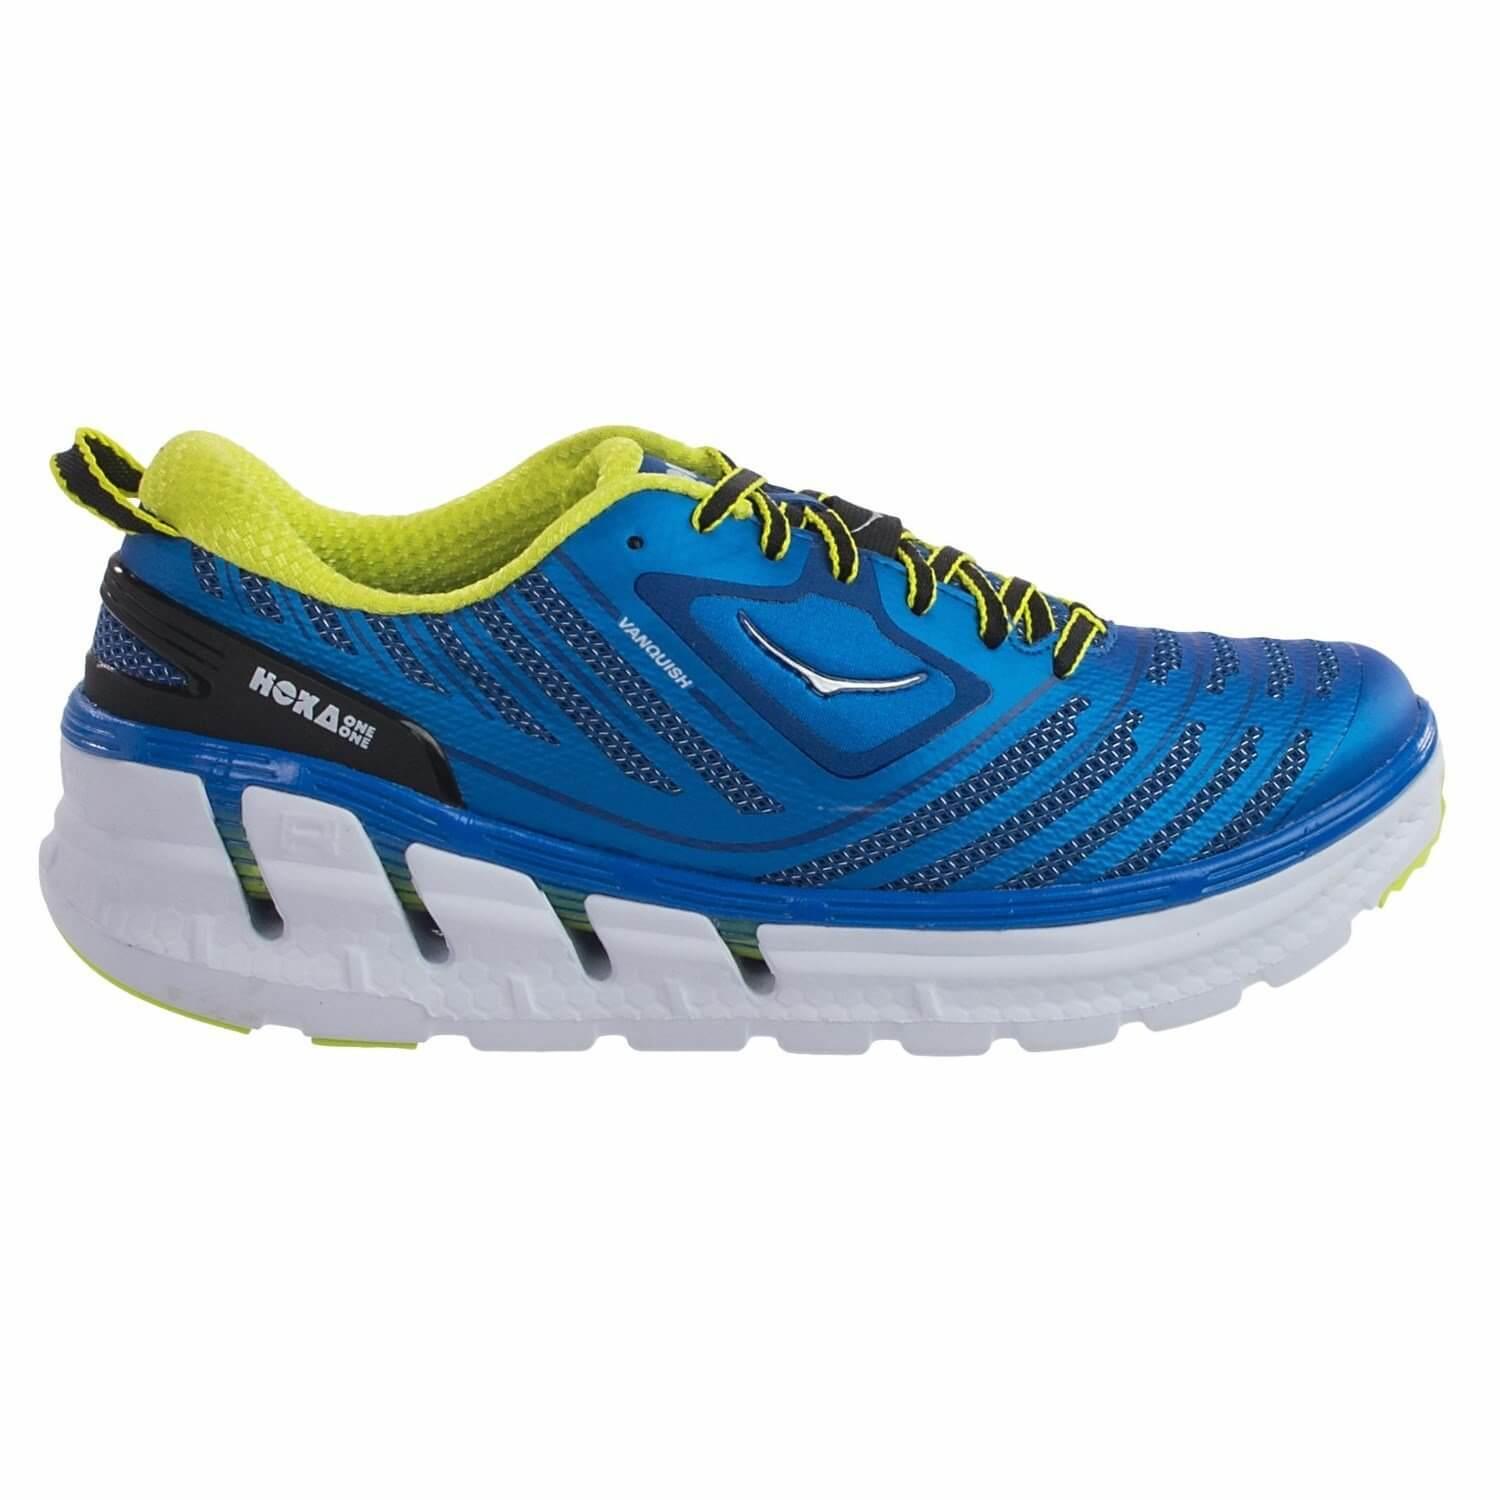 Hoka One One Vanquish Review - To buy or not in 2022 - StripeFit